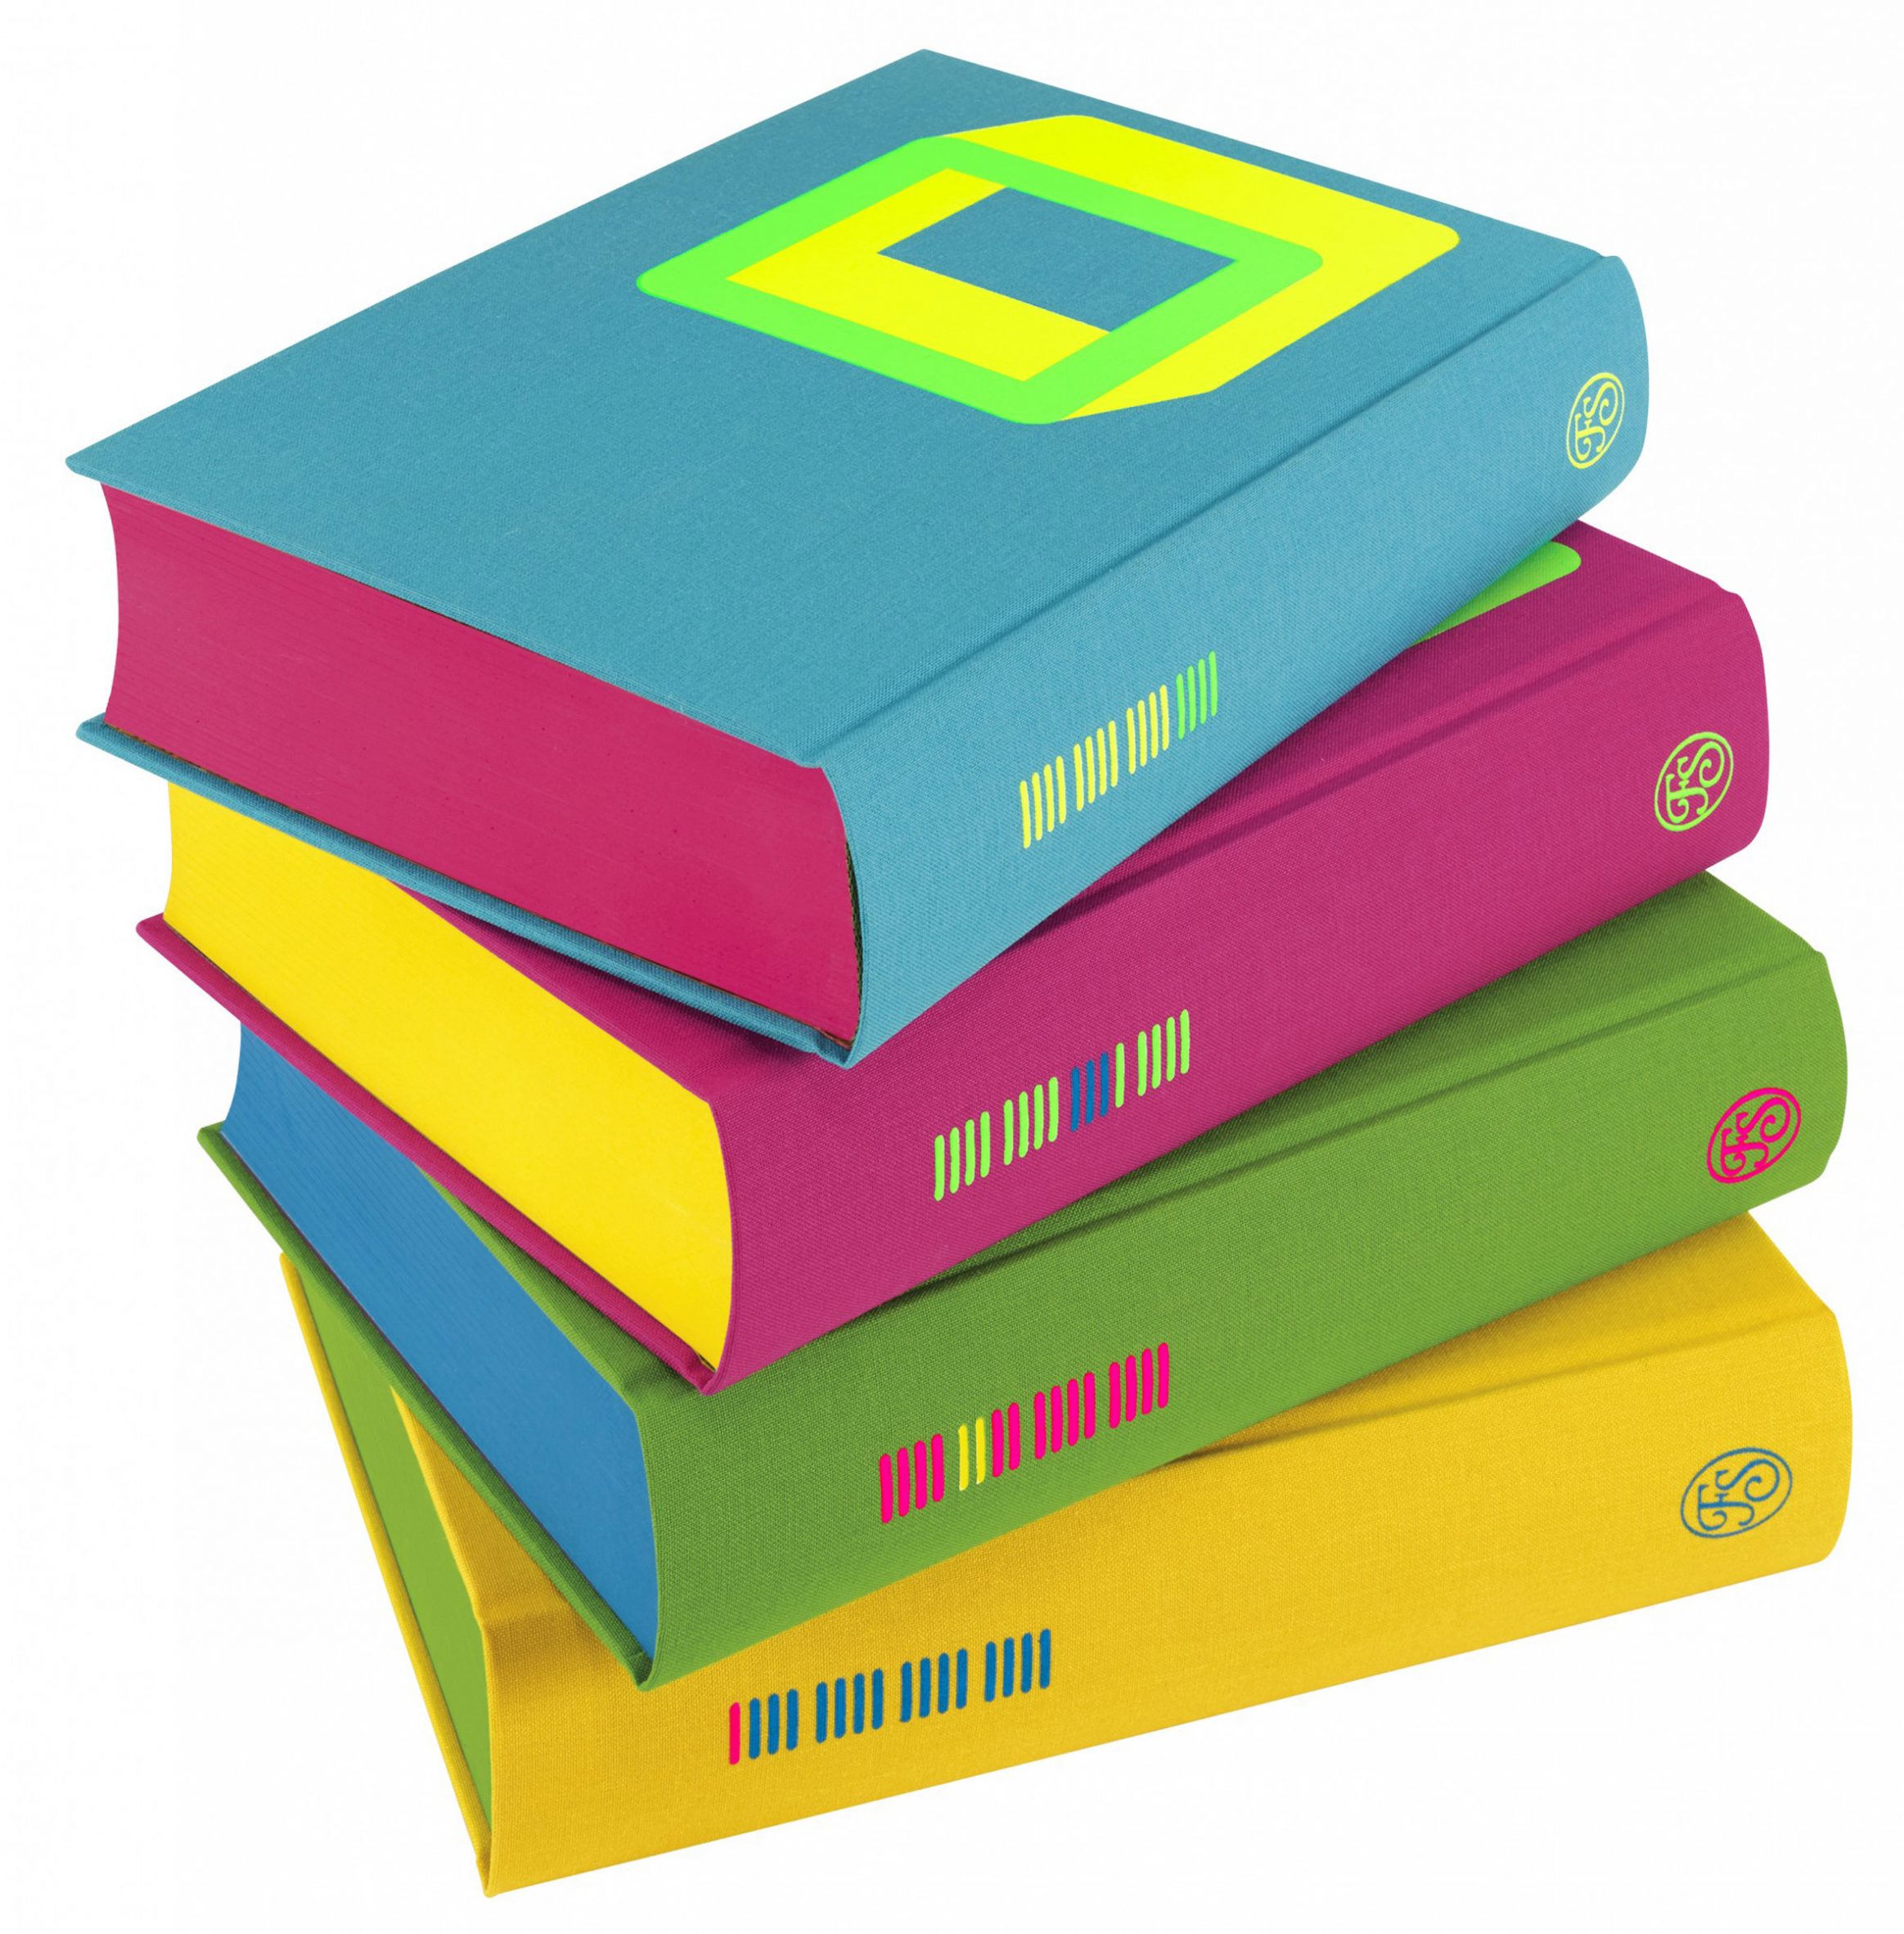 The Complete Short Stories: Philip K. Dick four volumes stacked to reveal their fluorescent page edges and a square symbol on the cover of the top volume